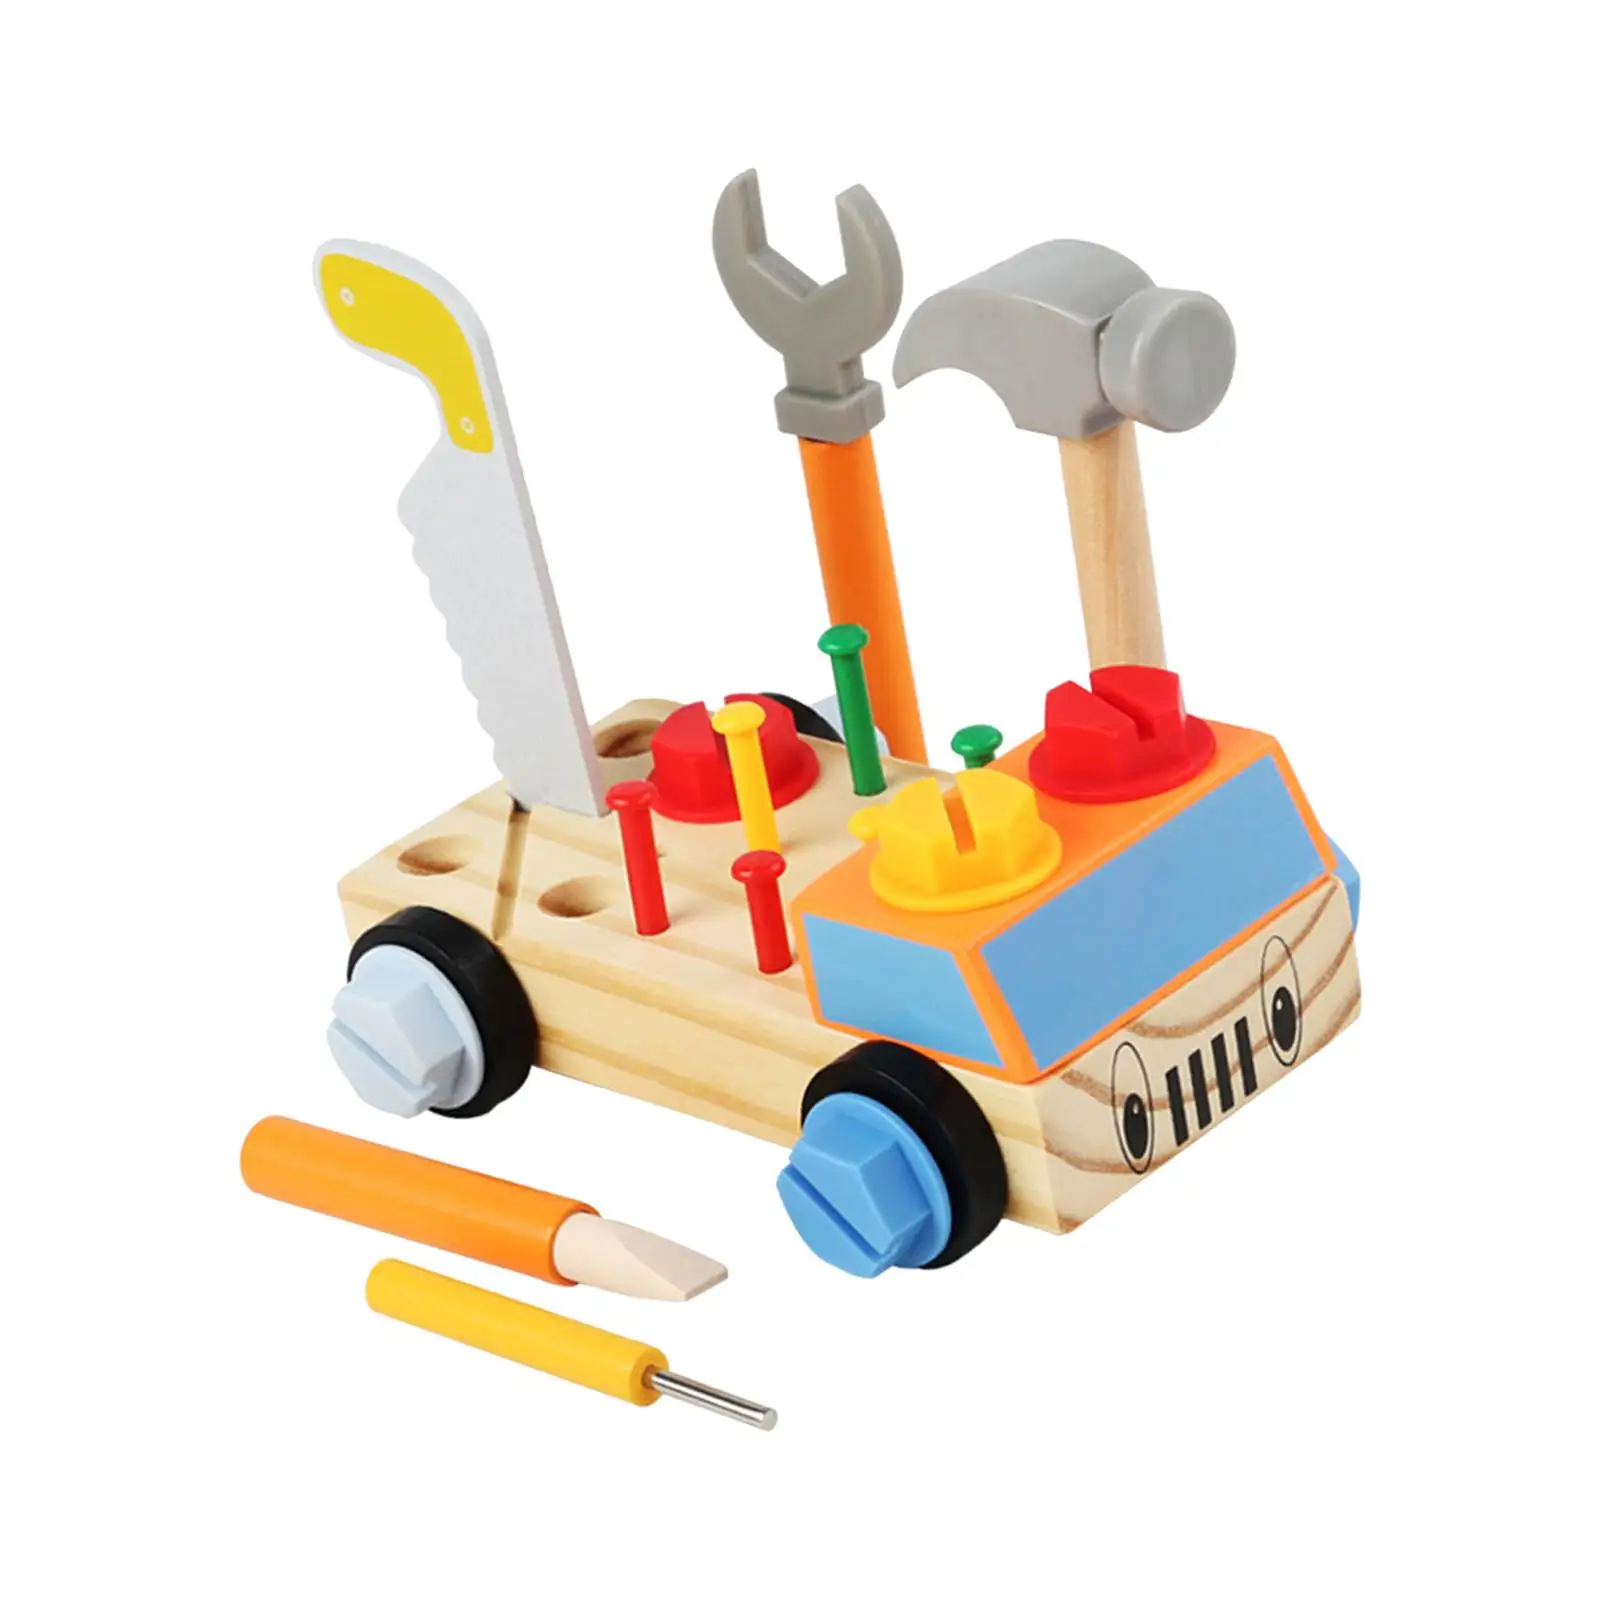 Children`s Construction Tool Workbench Developmental Toys Repair Tools Wooden Play Tool Set for Ages 3+ Preschool Birthday Gift